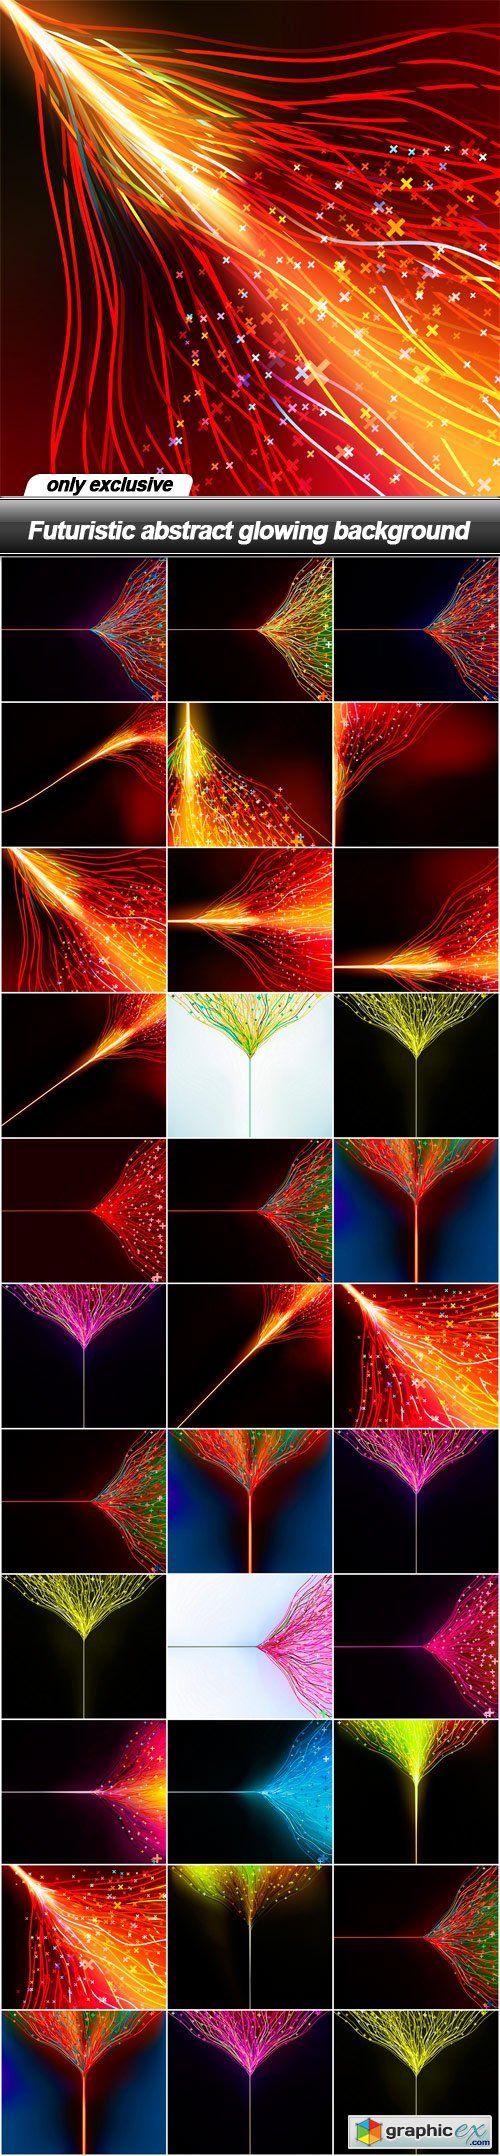 Futuristic abstract glowing background - 33 EPS